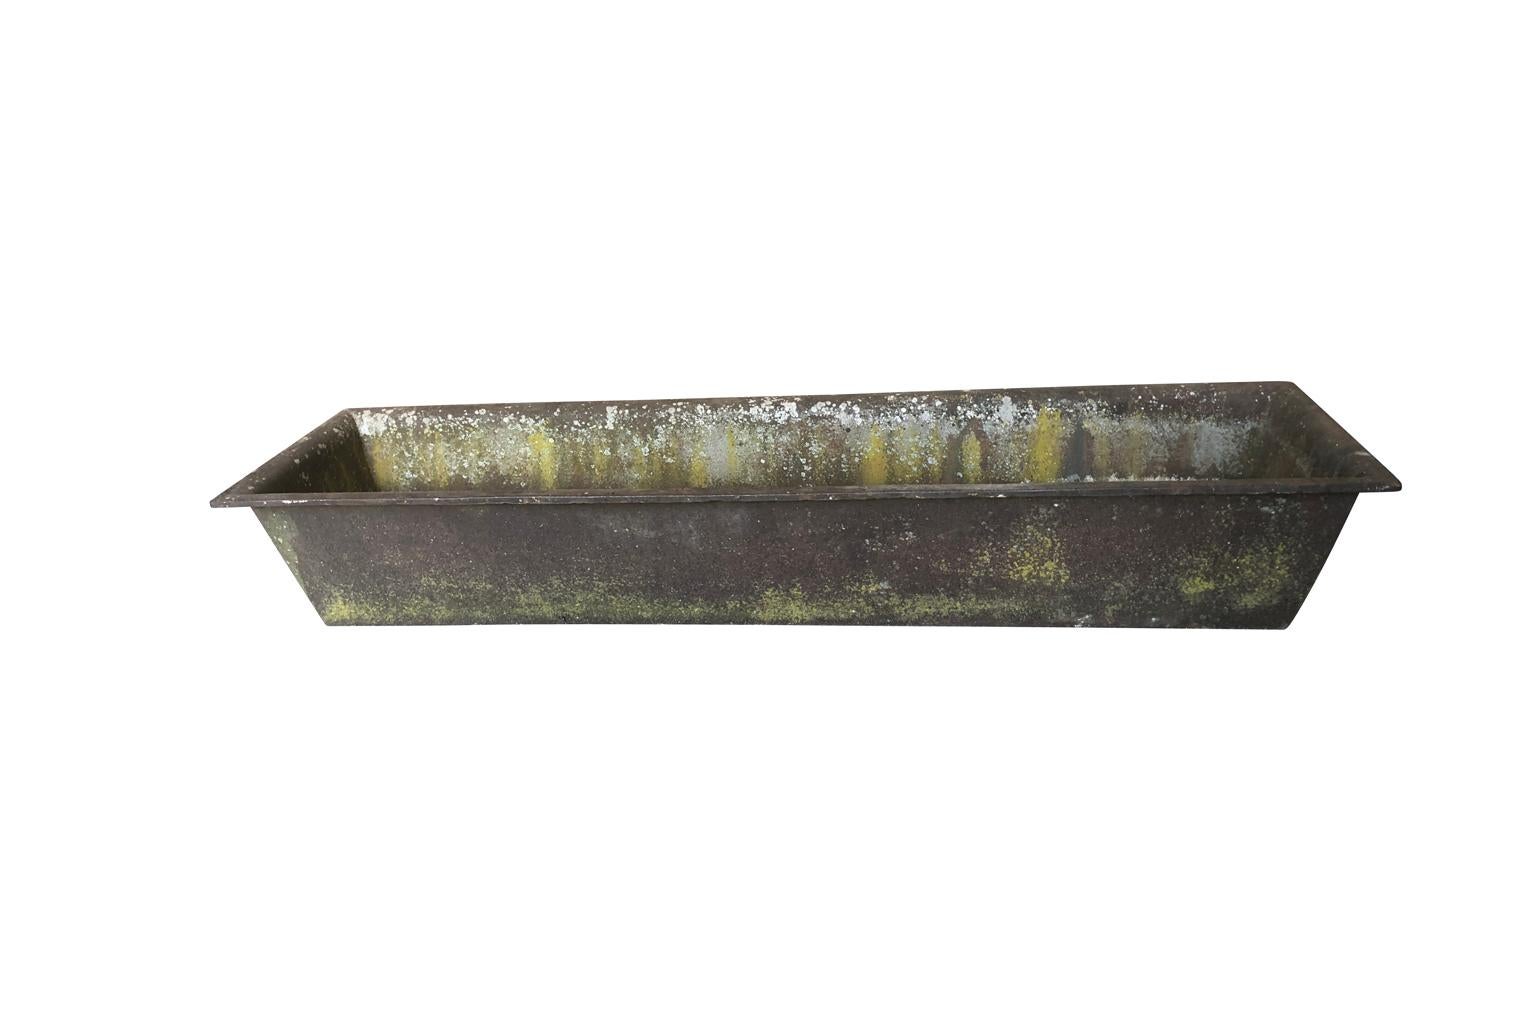 A terrific later 19th-early 20th century French trough in cast iron. Wonderful as a planter or jardinière or as a centerpiece for a large farm table.